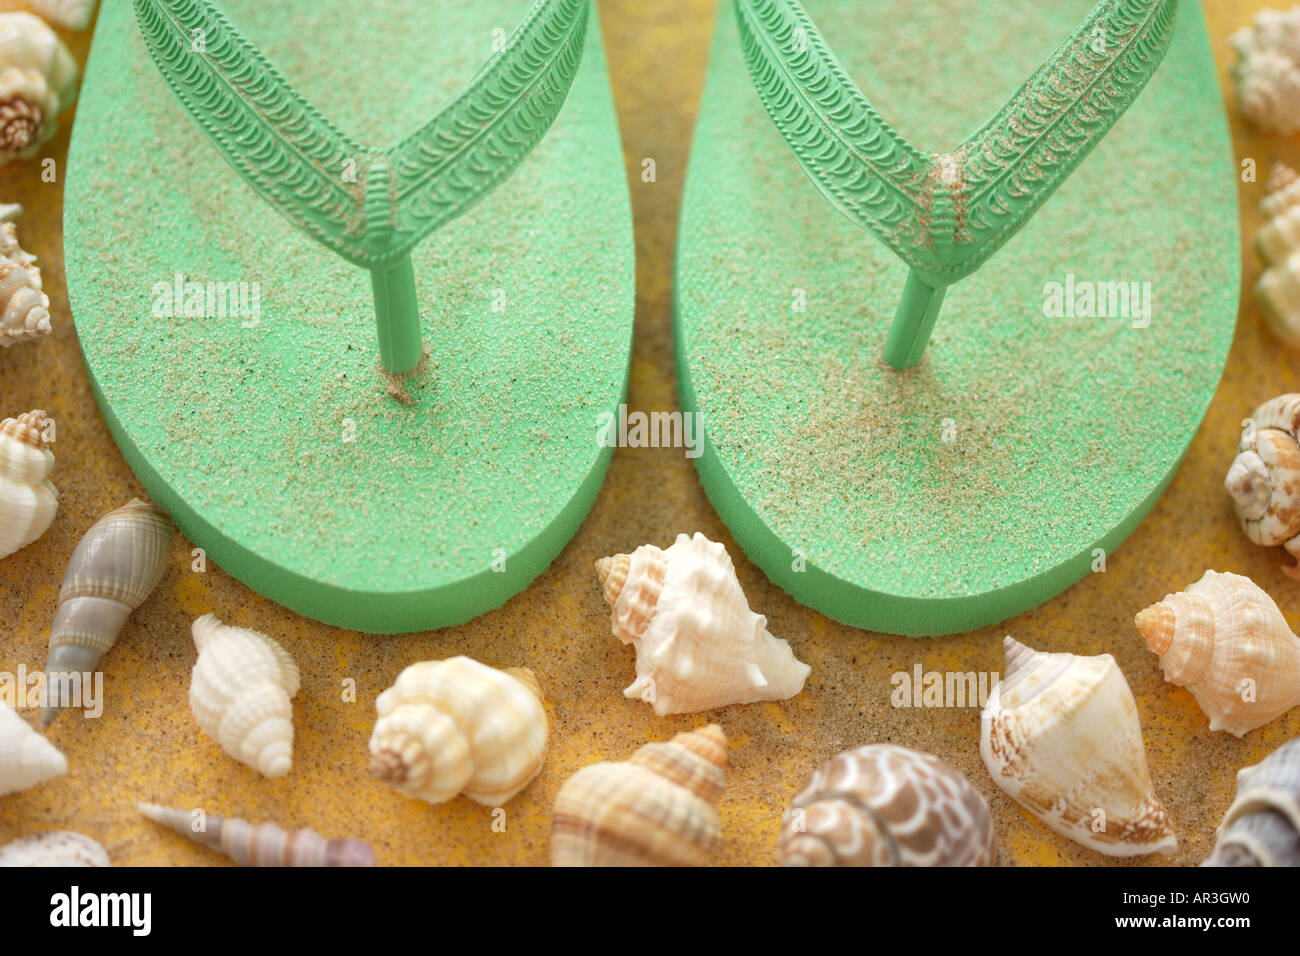 Pair of green flip flops surrounded by seashells and sand Stock Photo